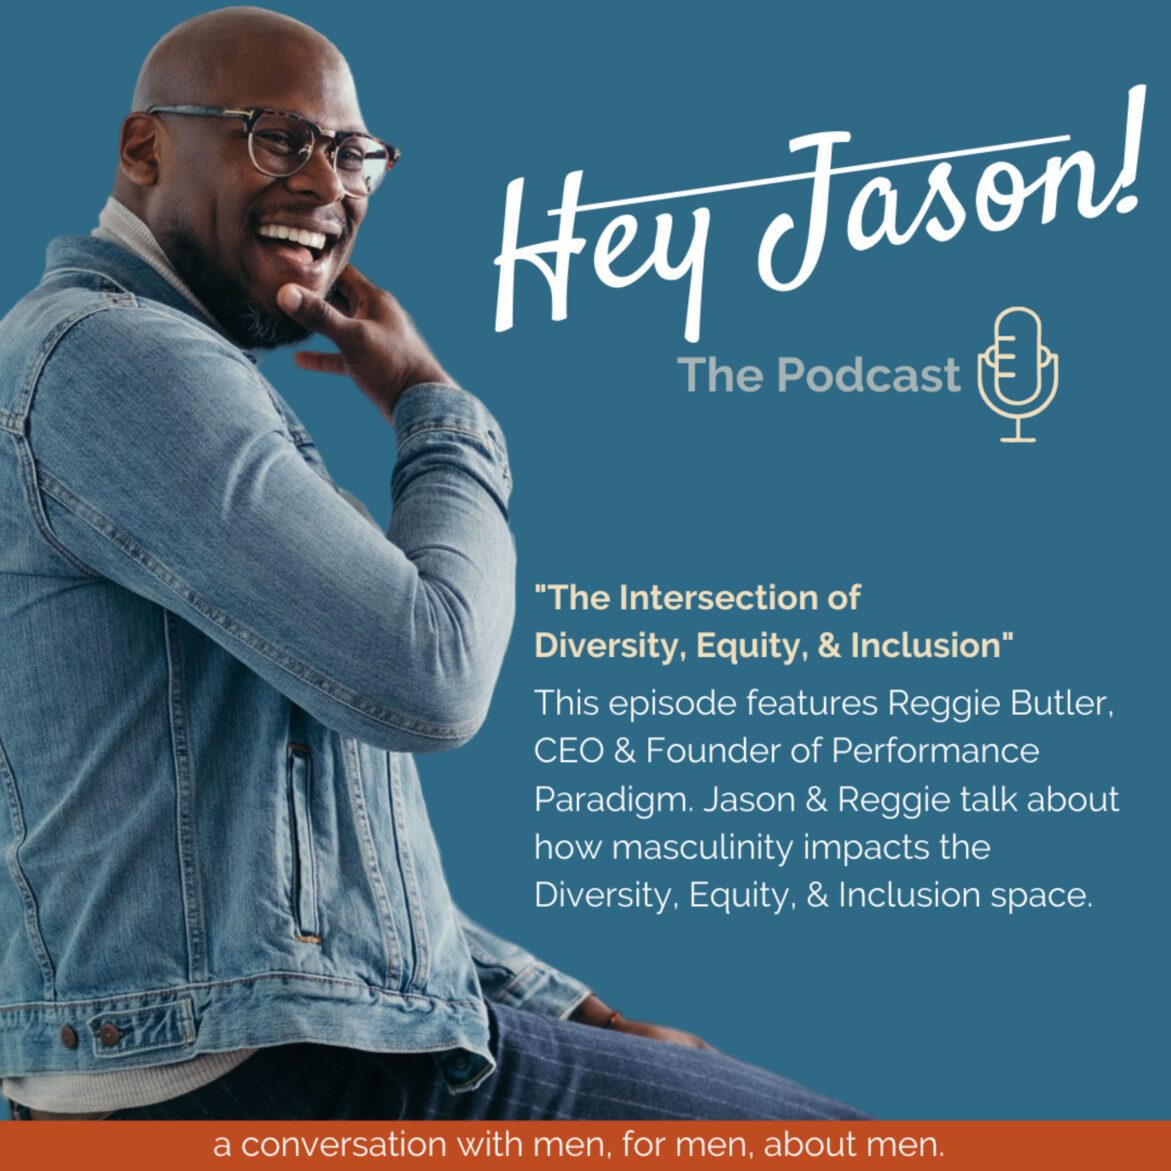 Black Podcasting - The Intersection of Masculinity, Diversity, Equity, & Inclusion w/ Reggie Butler